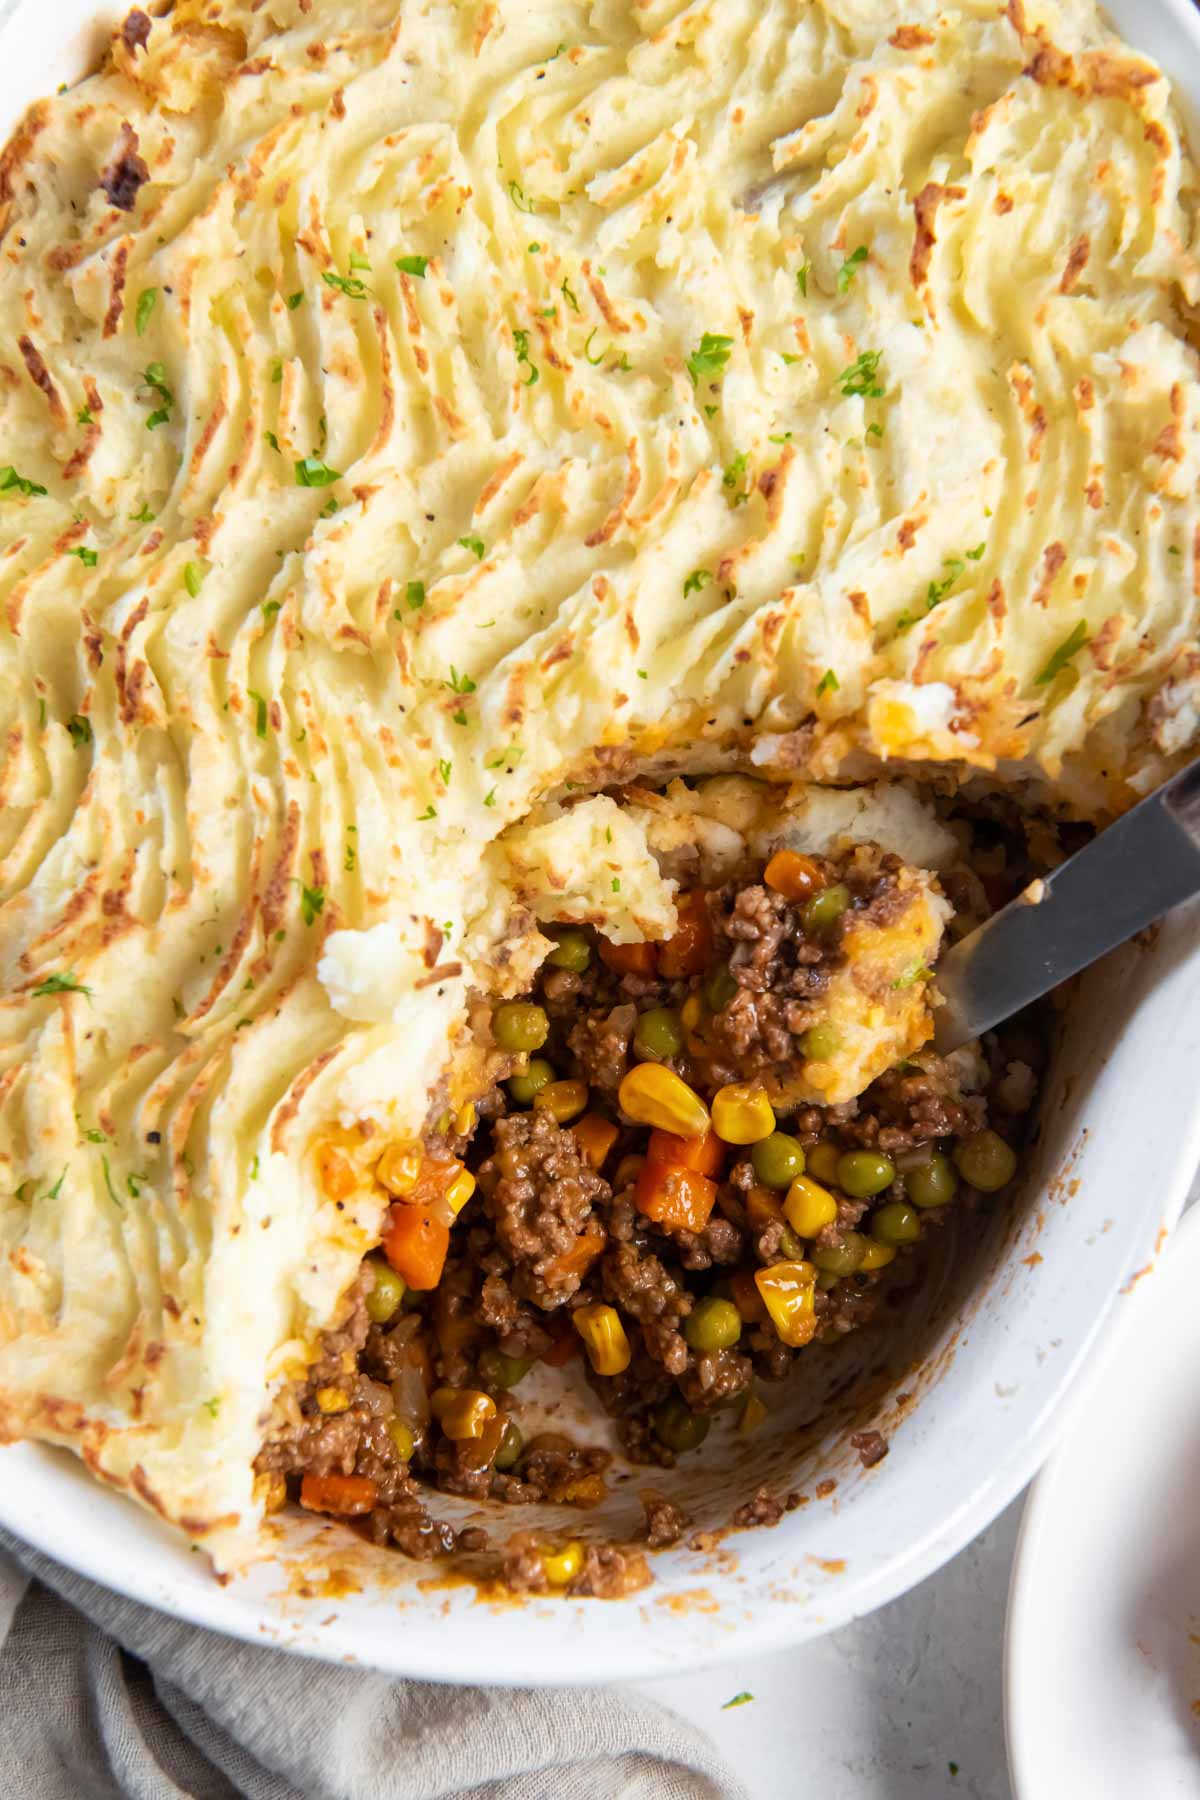 Baked shepherd's pie in dish with a serving spoon.